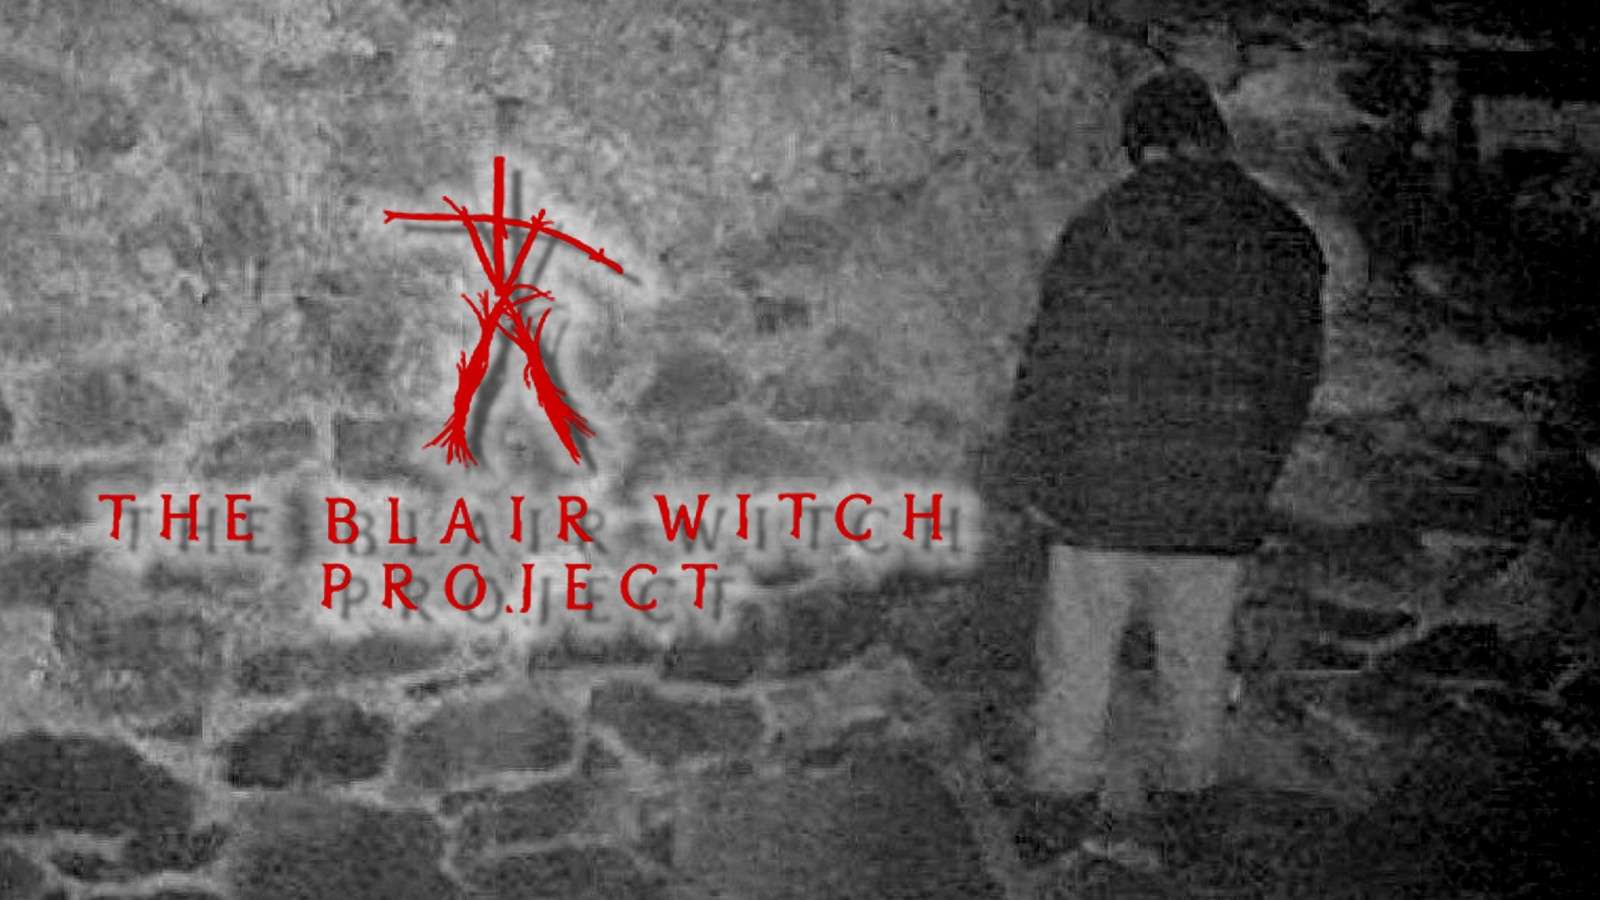 A still from The Blair Witch Project